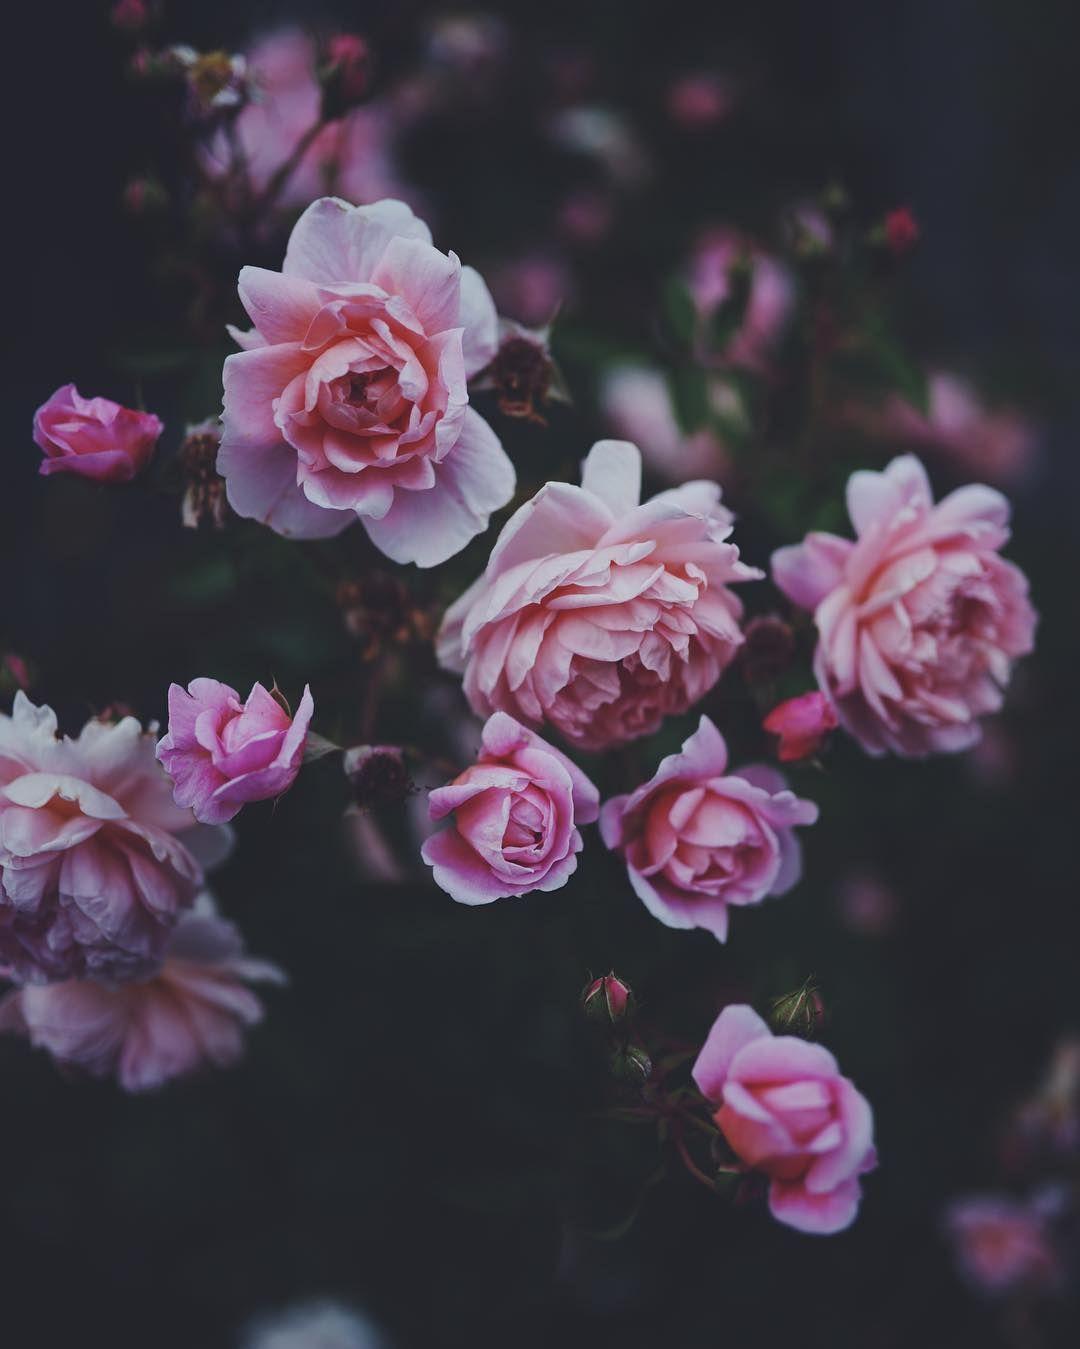 Tumblr Roses HD Wallpapers - Top Free Tumblr Roses HD Backgrounds ...